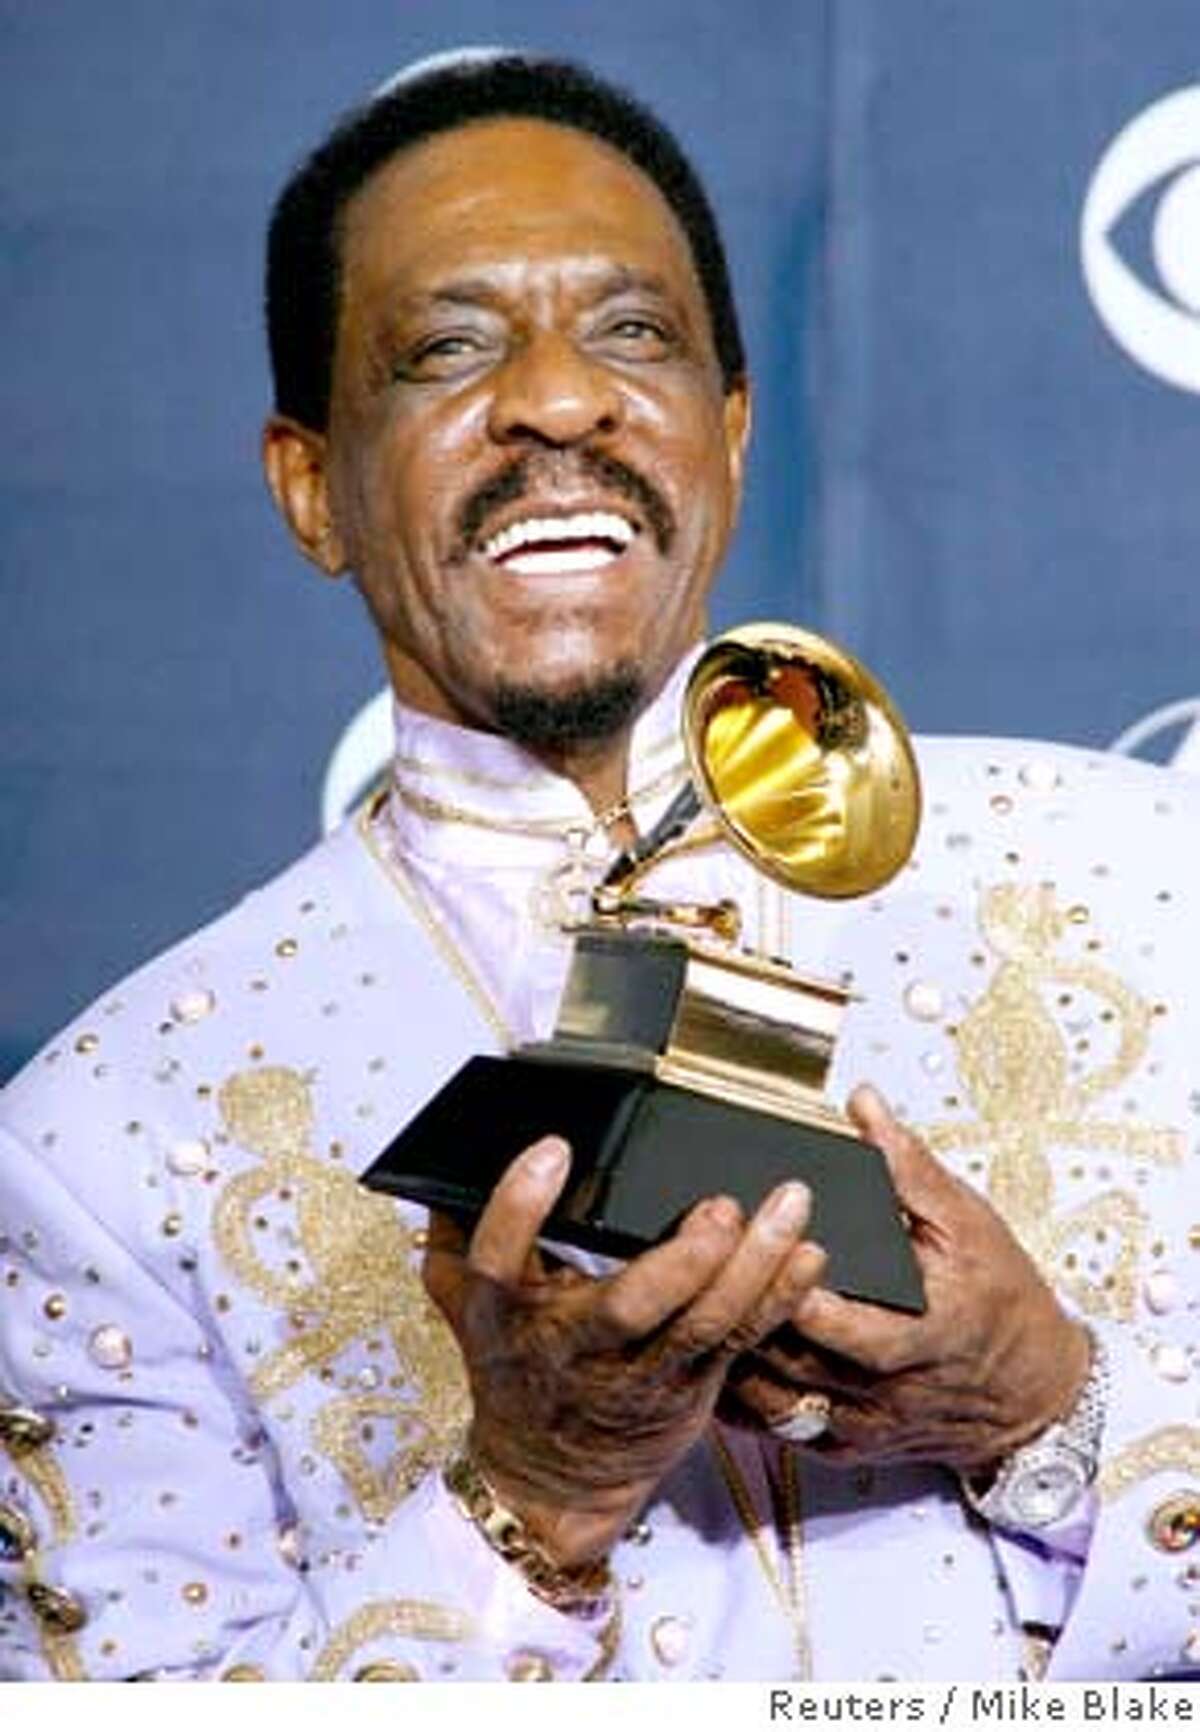 Ike poses with his Grammy for Best Traditional Blues Album for 'Risin With the Blues' at the 49th Annual Grammy Awards in Los Angeles in this February 11, 2007 file photo. Rock 'n' roll pioneer Turner, who rose to fame in the 1950s and became a star performing with his ex-wife Tina Turner, has died at age 76, according to published reports on December 12, 2007. REUTERS/Mike Blake (UNITED STATES)